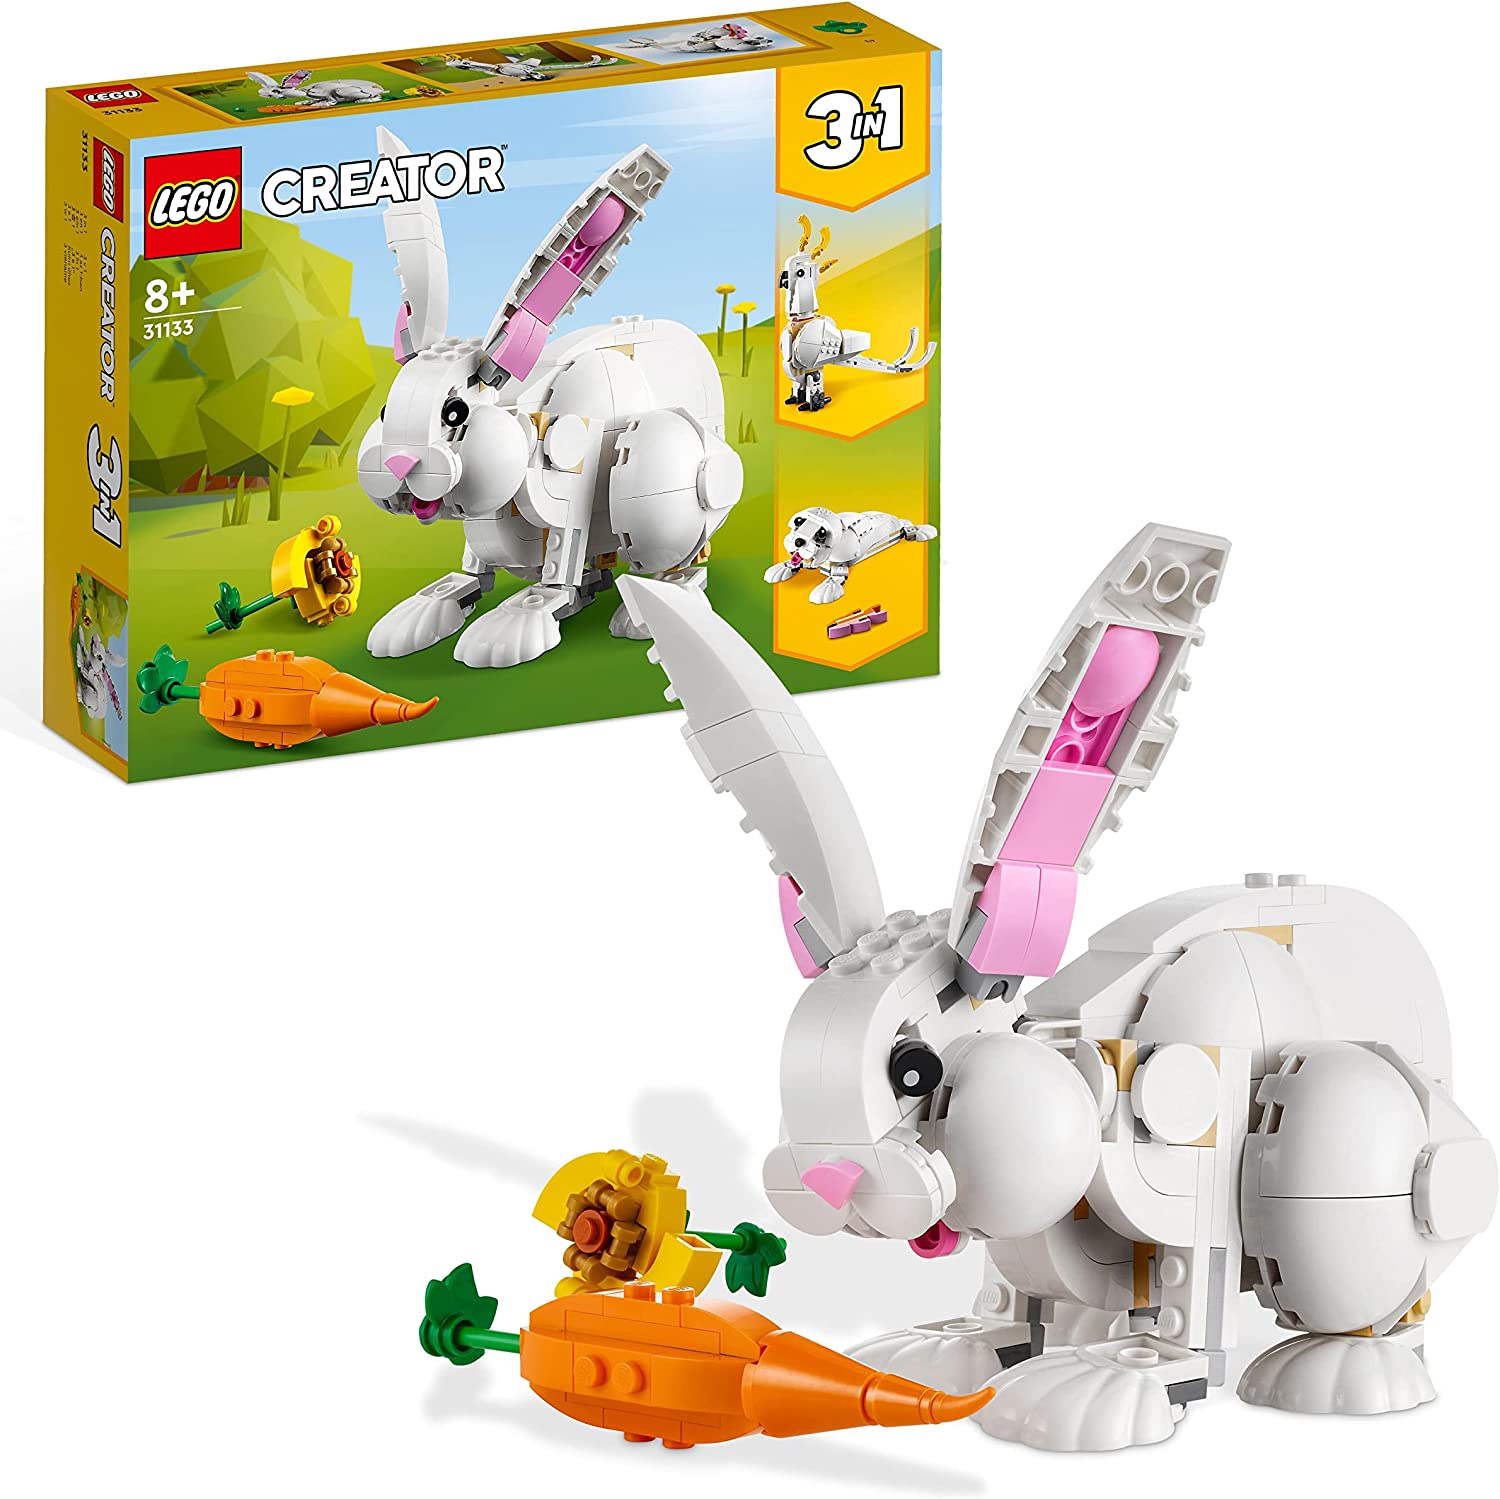 LEGO 31133 Creator 3-in-1 White Rabbit Animal Toy Set with Rabbit, Seal and Parrot Figures, Building Block Construction Toy for Children from 8 Years